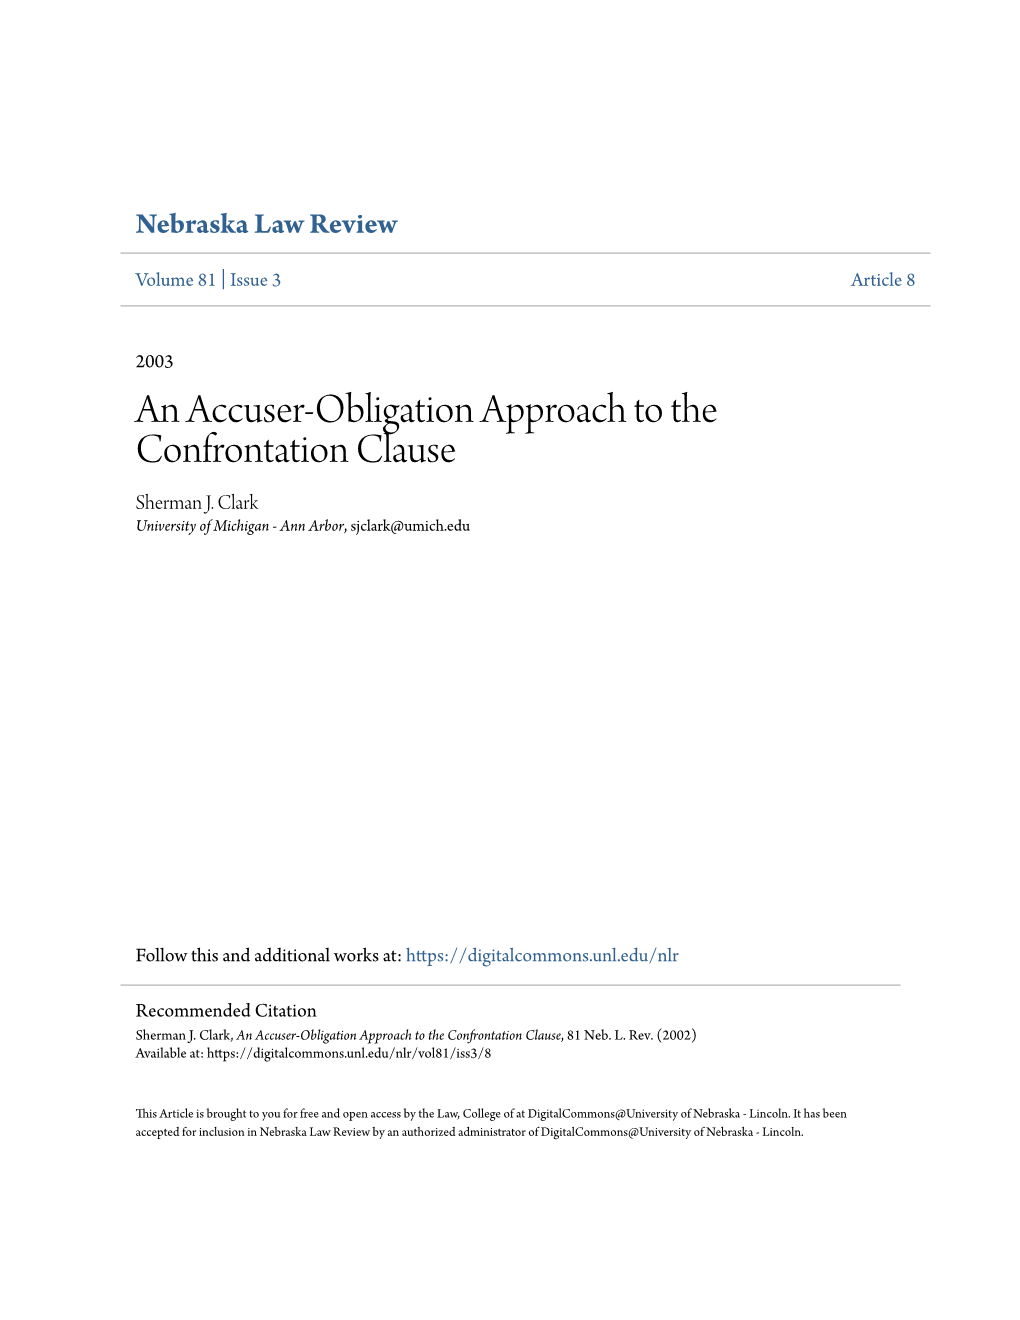 An Accuser-Obligation Approach to the Confrontation Clause Sherman J